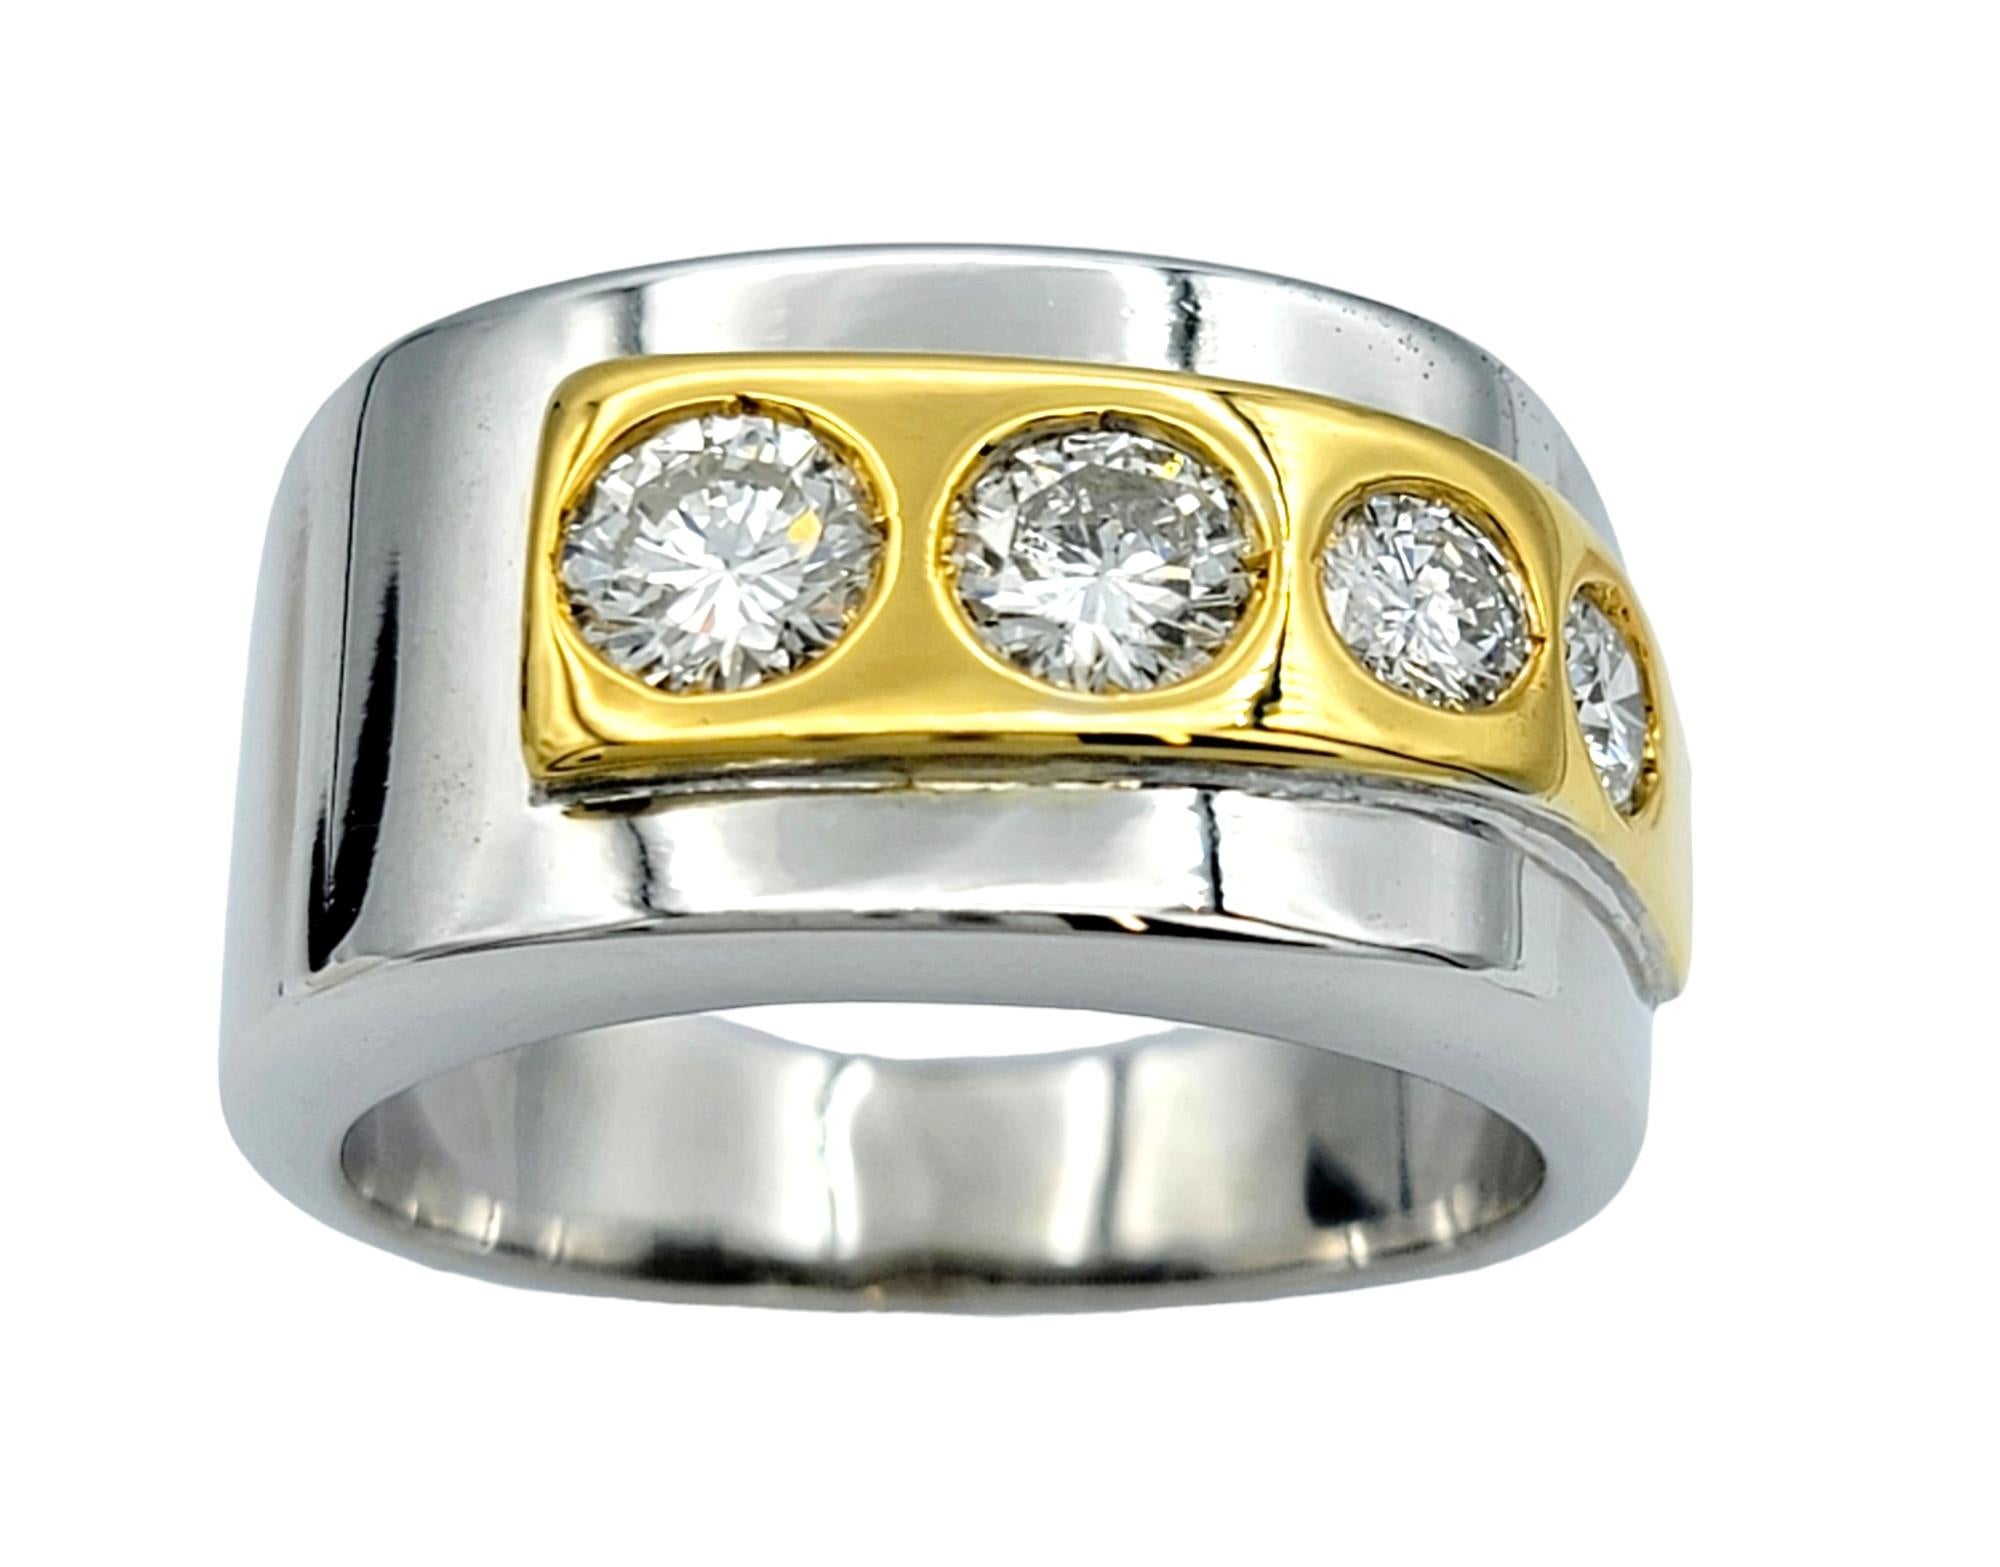 Ring size: 11.25

Introducing this handsome men's two-tone gold band ring, a harmonious blend of contemporary design and timeless sophistication. This distinctive ring is expertly crafted from high-quality gold, featuring an asymmetrical design that